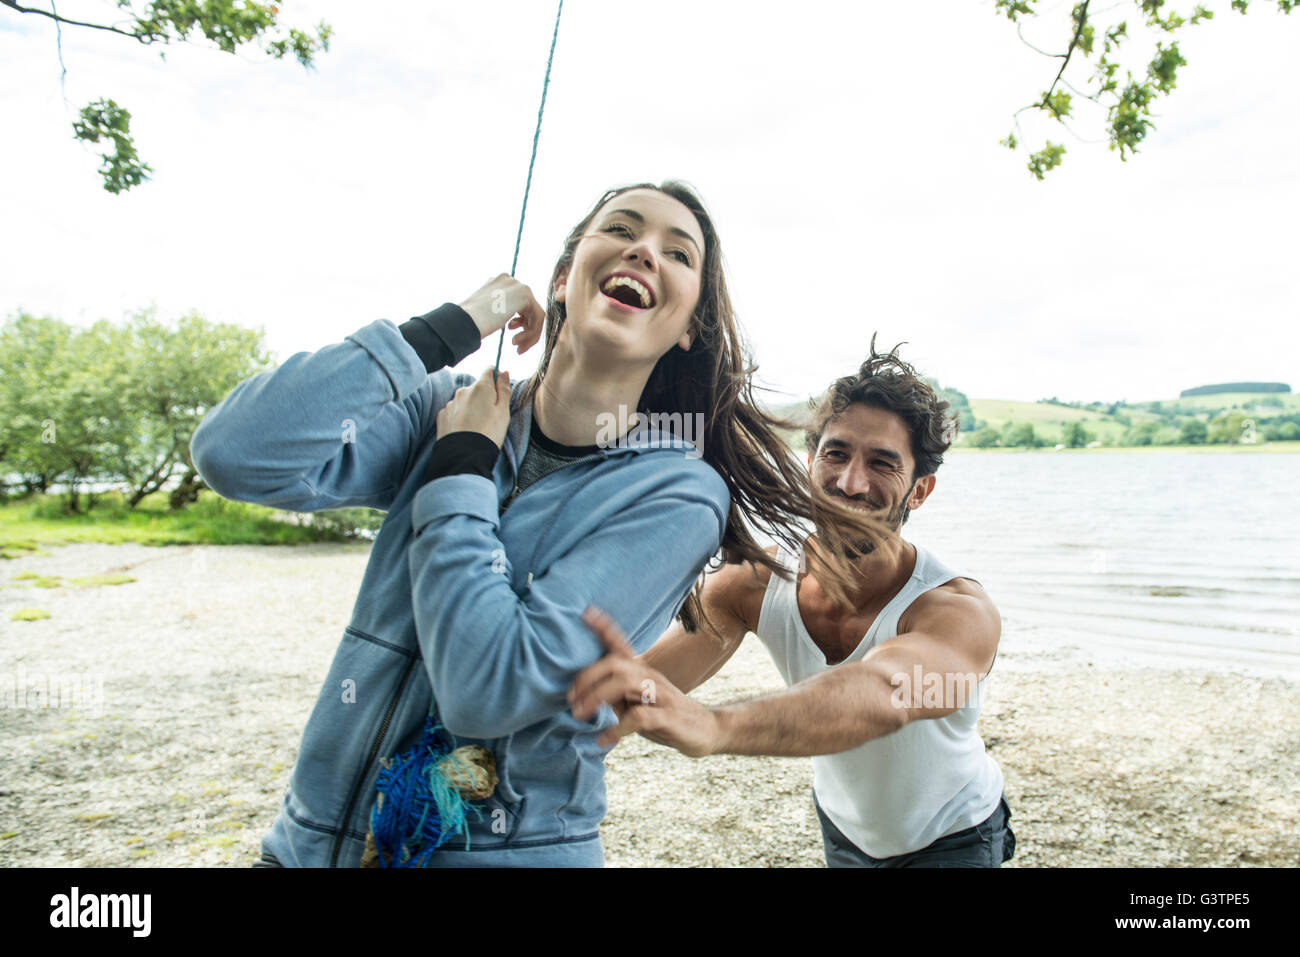 A man and a woman playing on a tyre hanging from a tree on the shore beside Bala Lake in Wales. Stock Photo